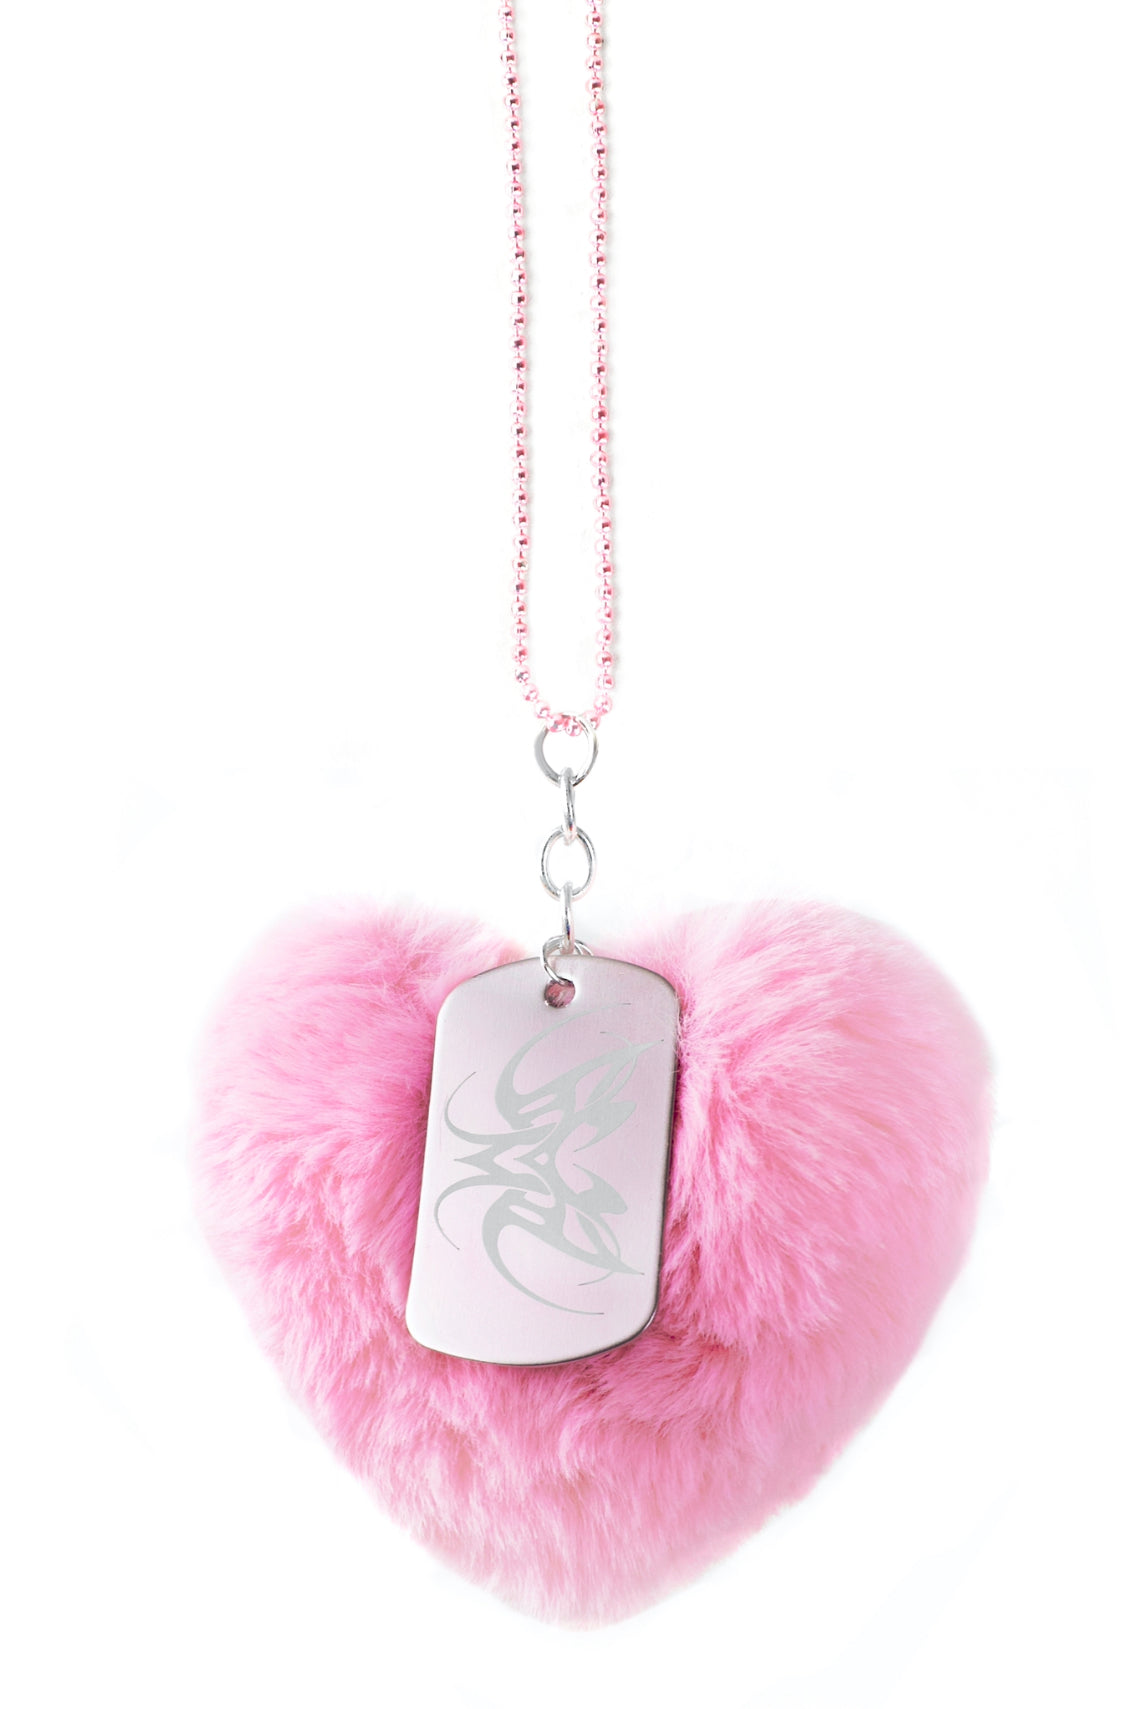 Fluffy Pink Heart Necklace